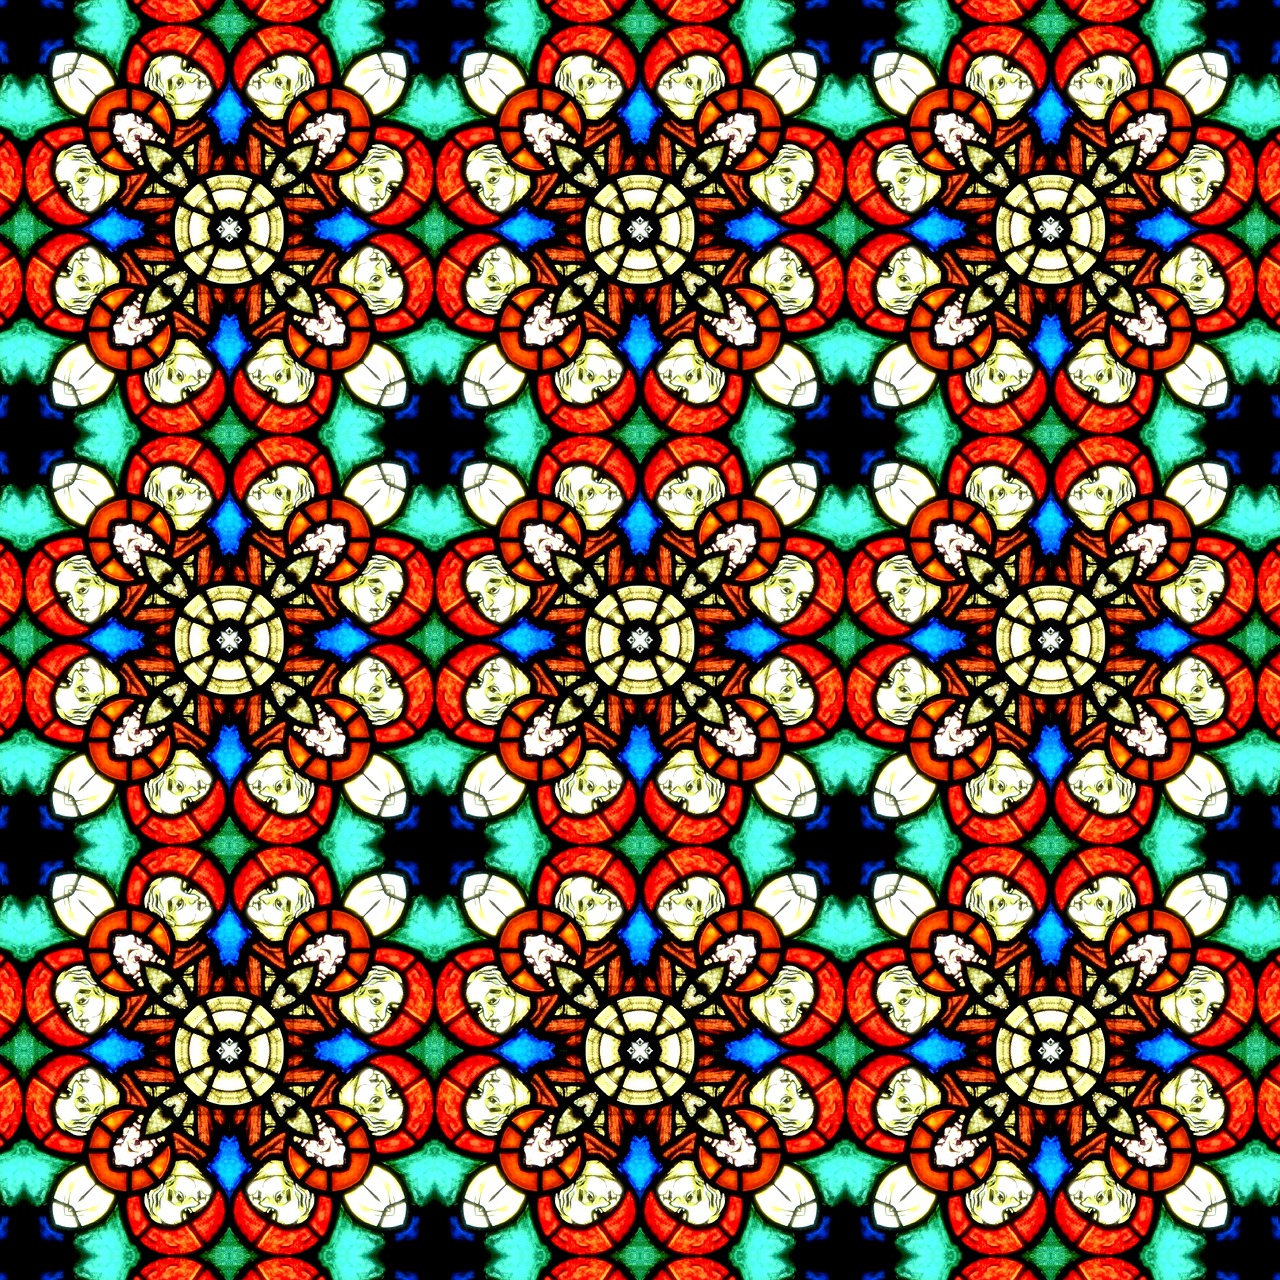 Stained Glass Pattern Texture Face Faces Free Image From Needpix Com